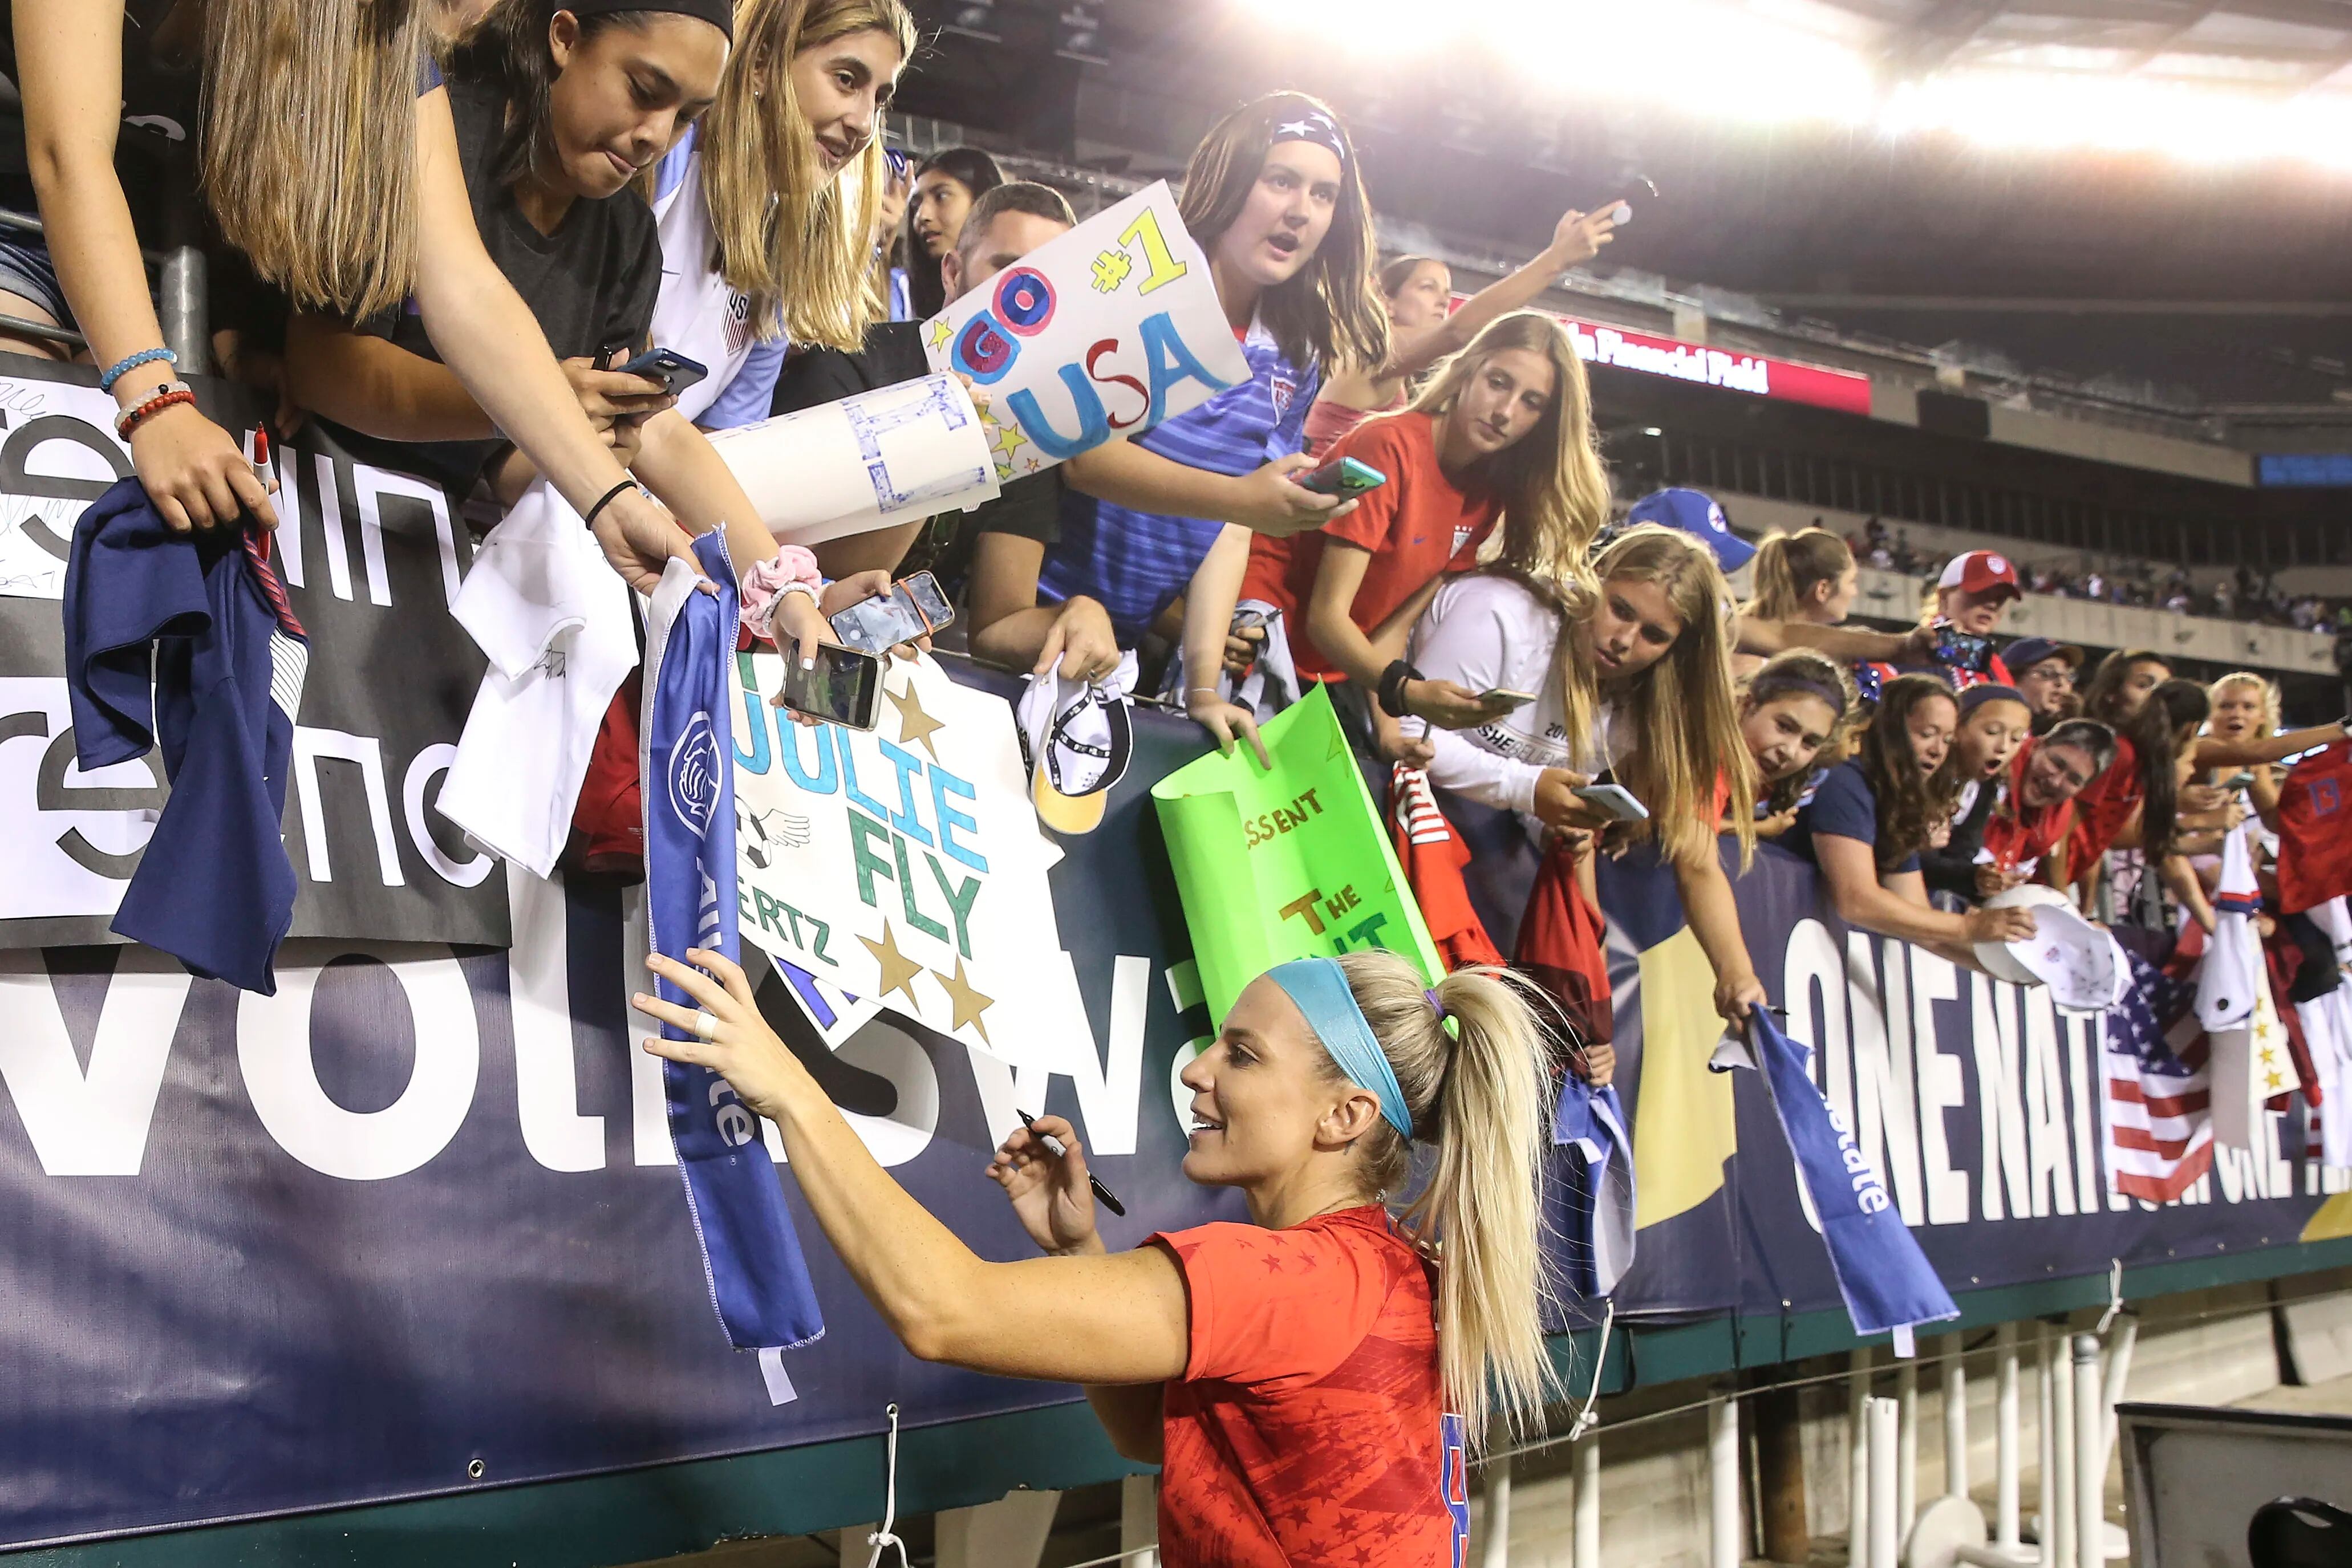 Julie Ertz signed lots of autographs for fans when the U.S. women played at Lincoln Financial Field in 2019, and set a team attendance record that still stands.